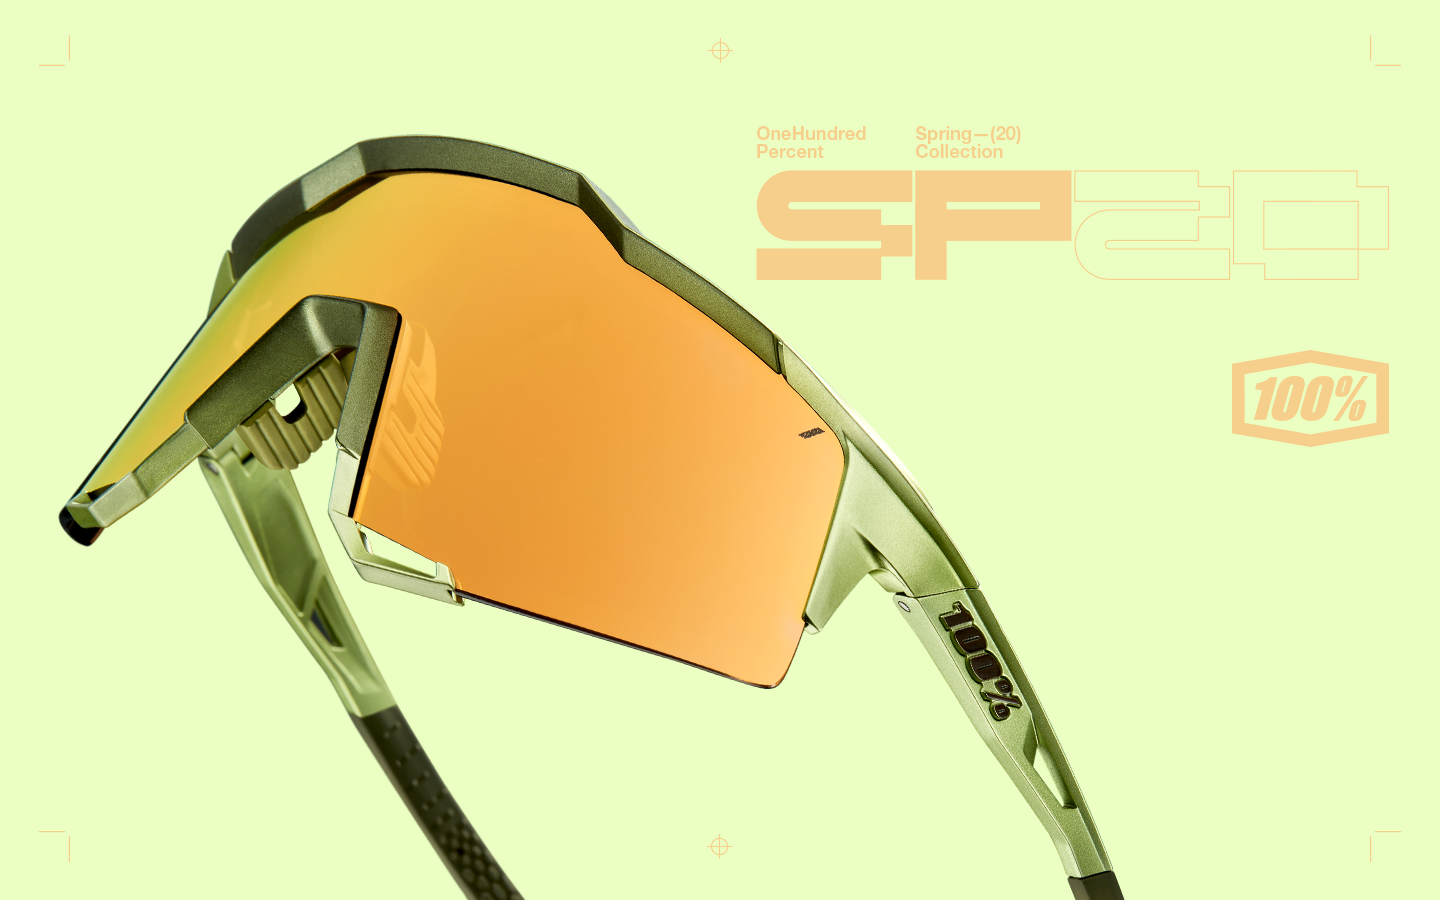 Introducing the SP20 Eyewear Collection - 100% Europe